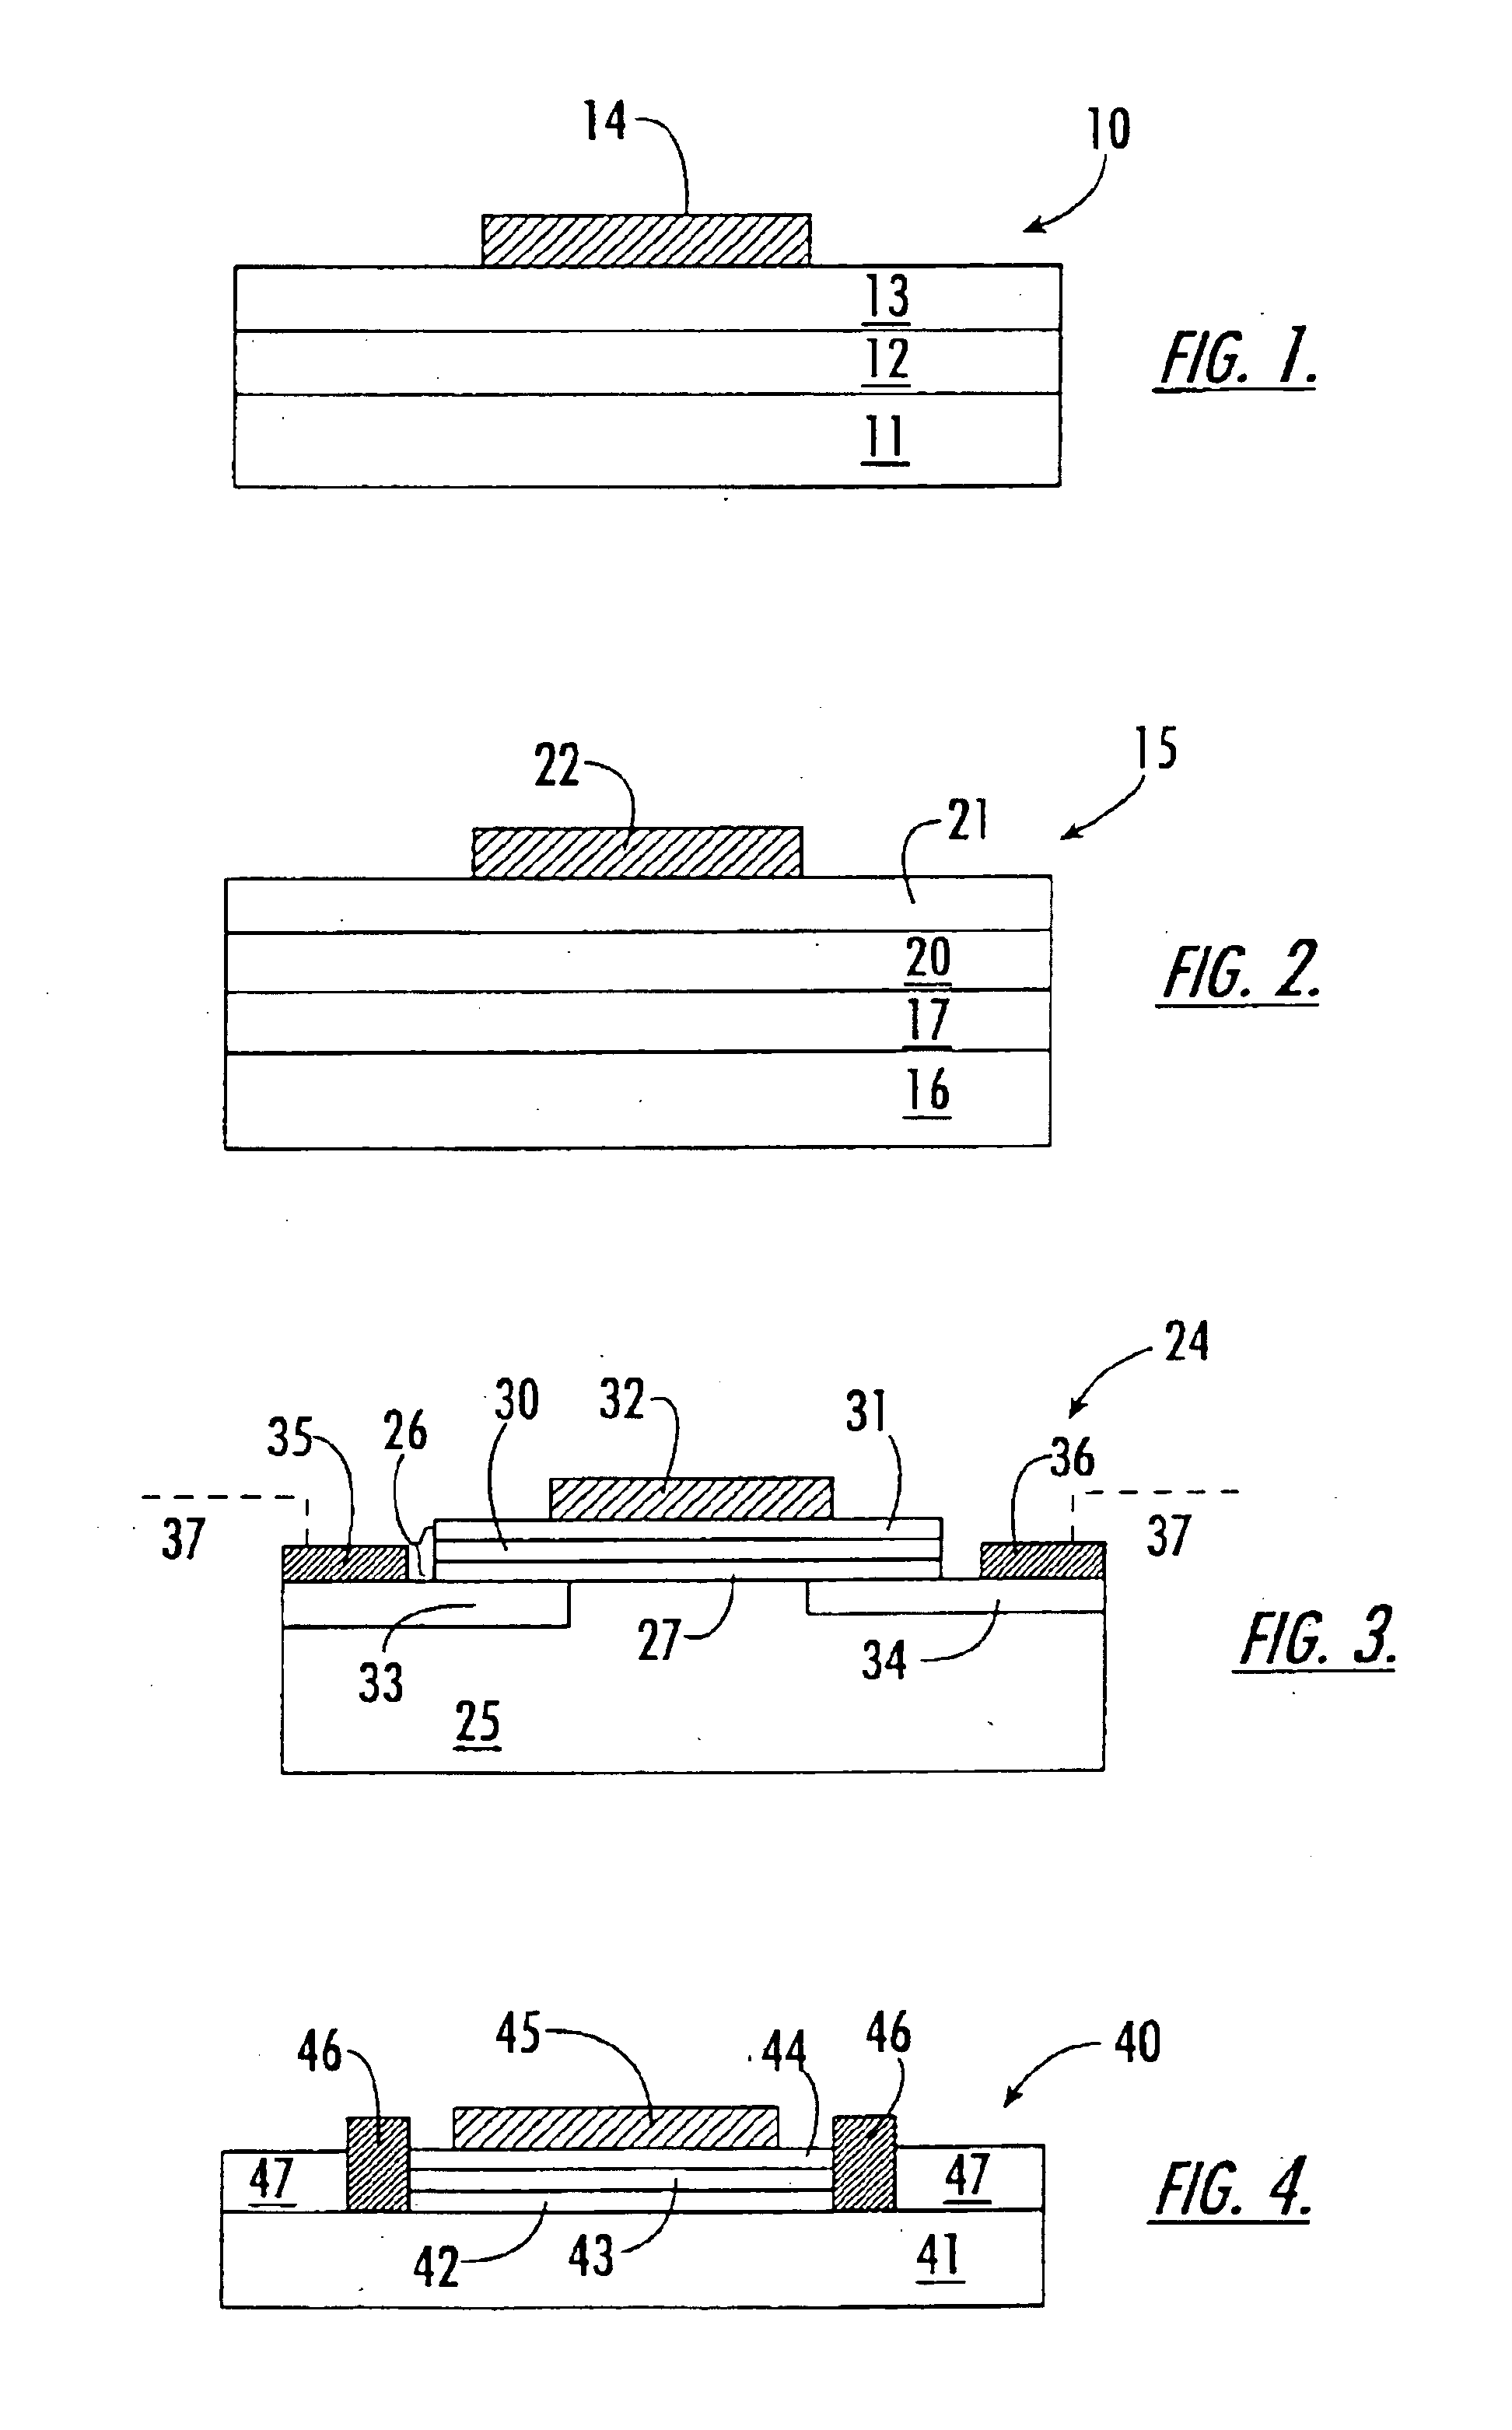 High voltage, high temperature capacitor and interconnection structures